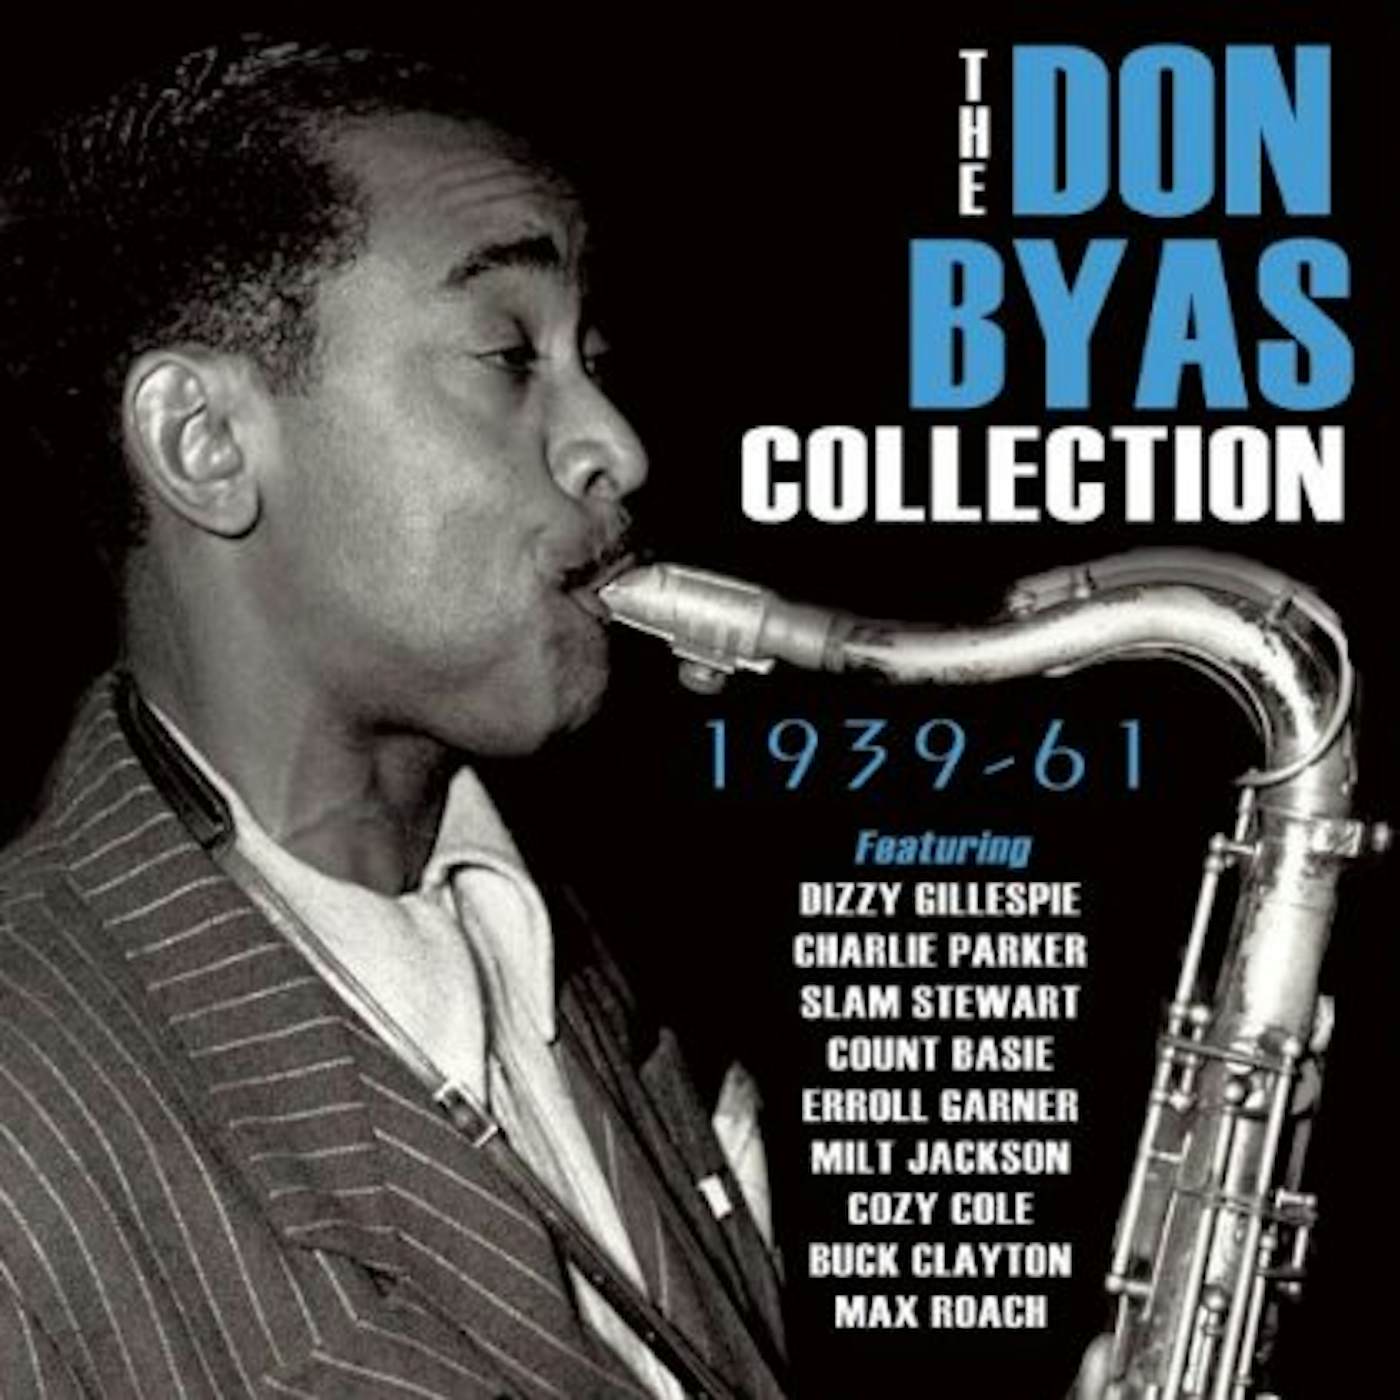 DON BYAS COLLECTION 1939-61 CD